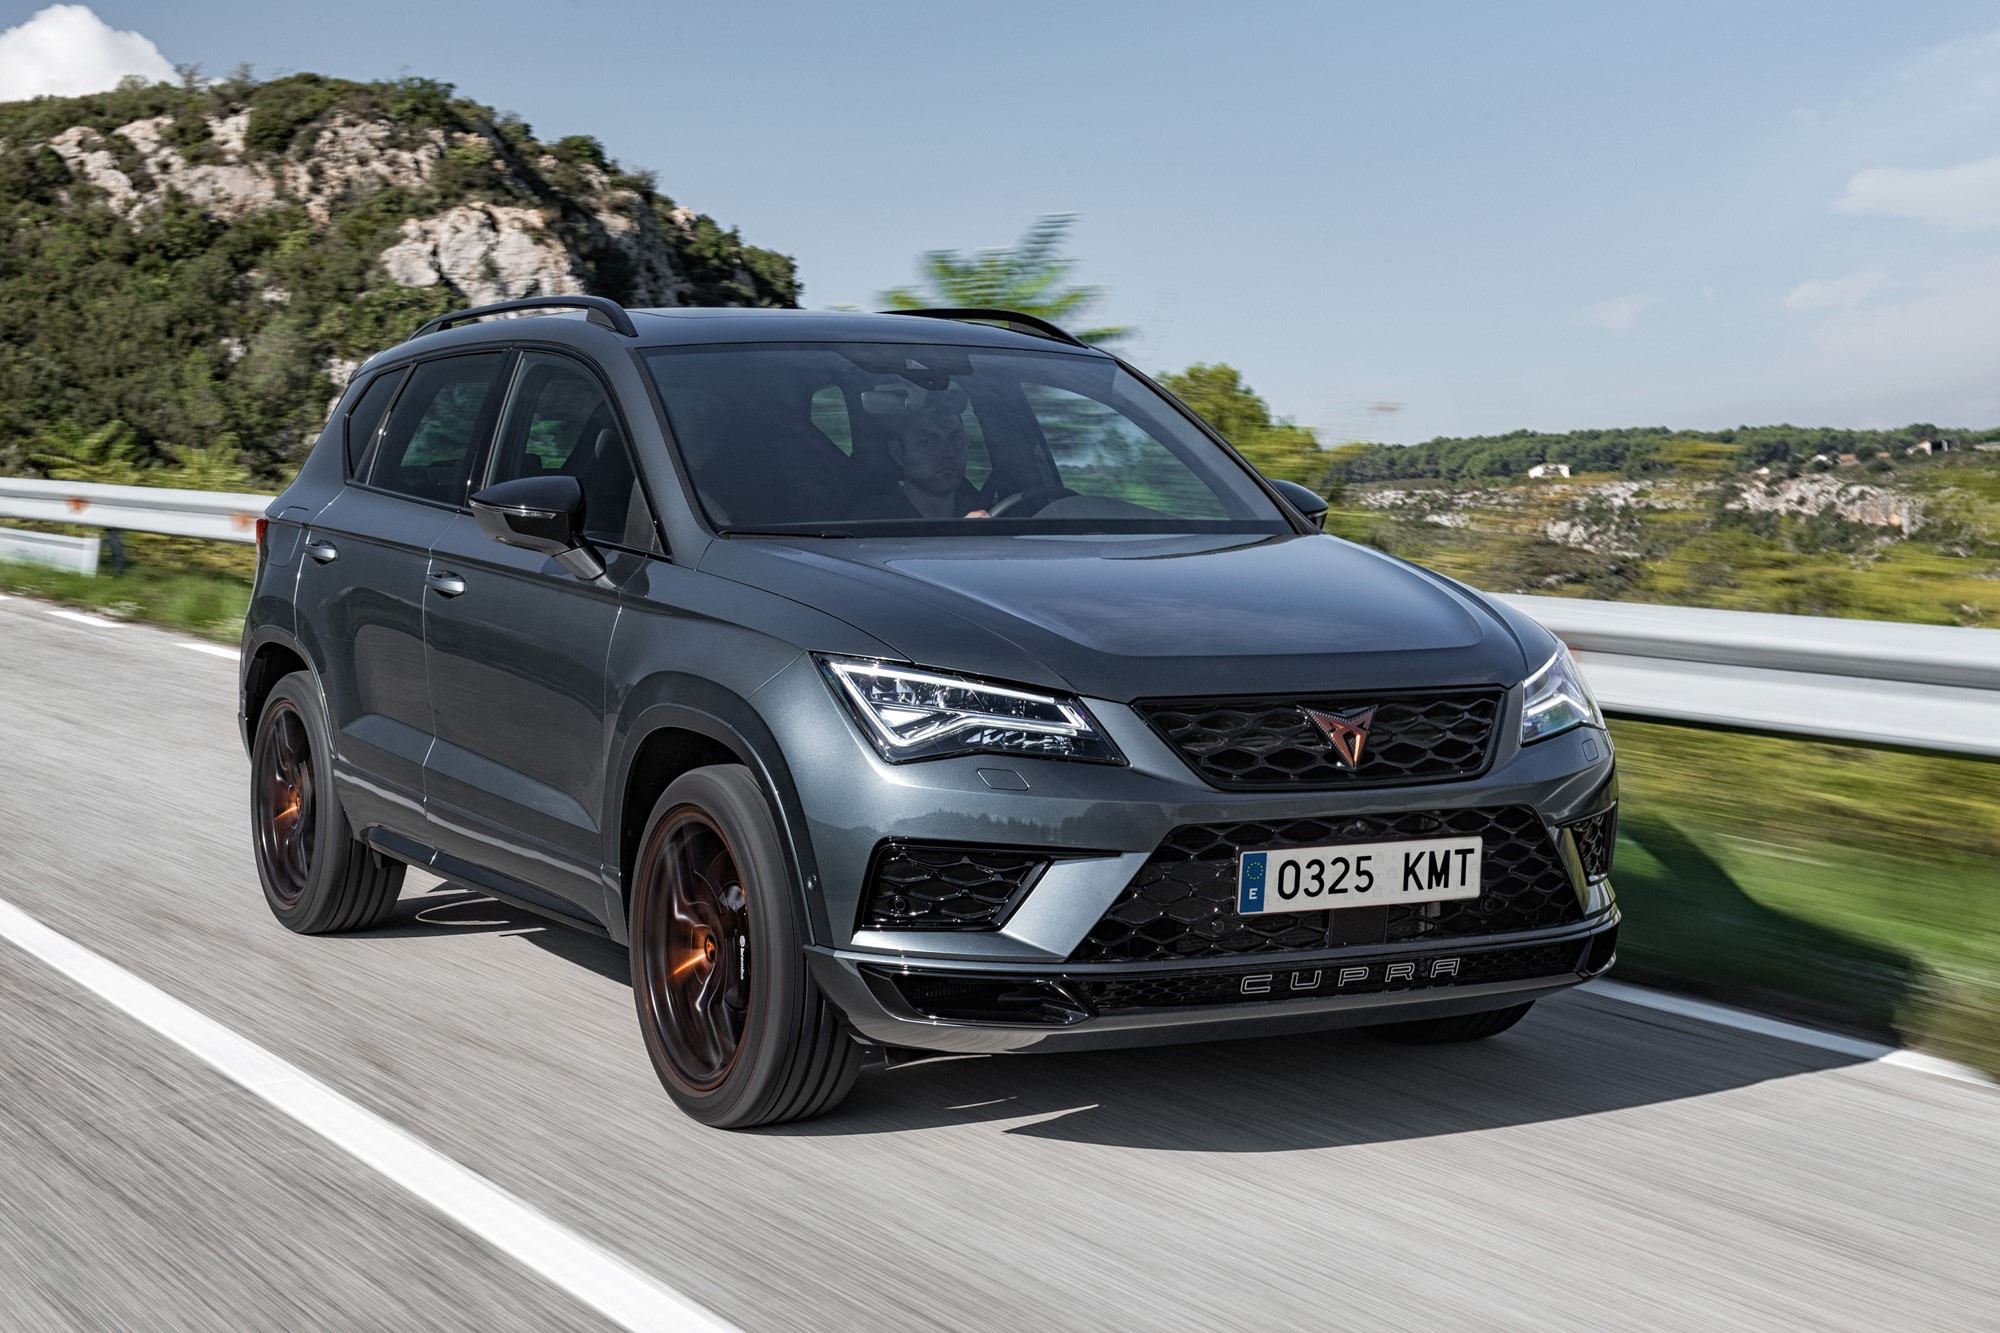 Cupra Ateca priced from £35,900: full technical details revealed